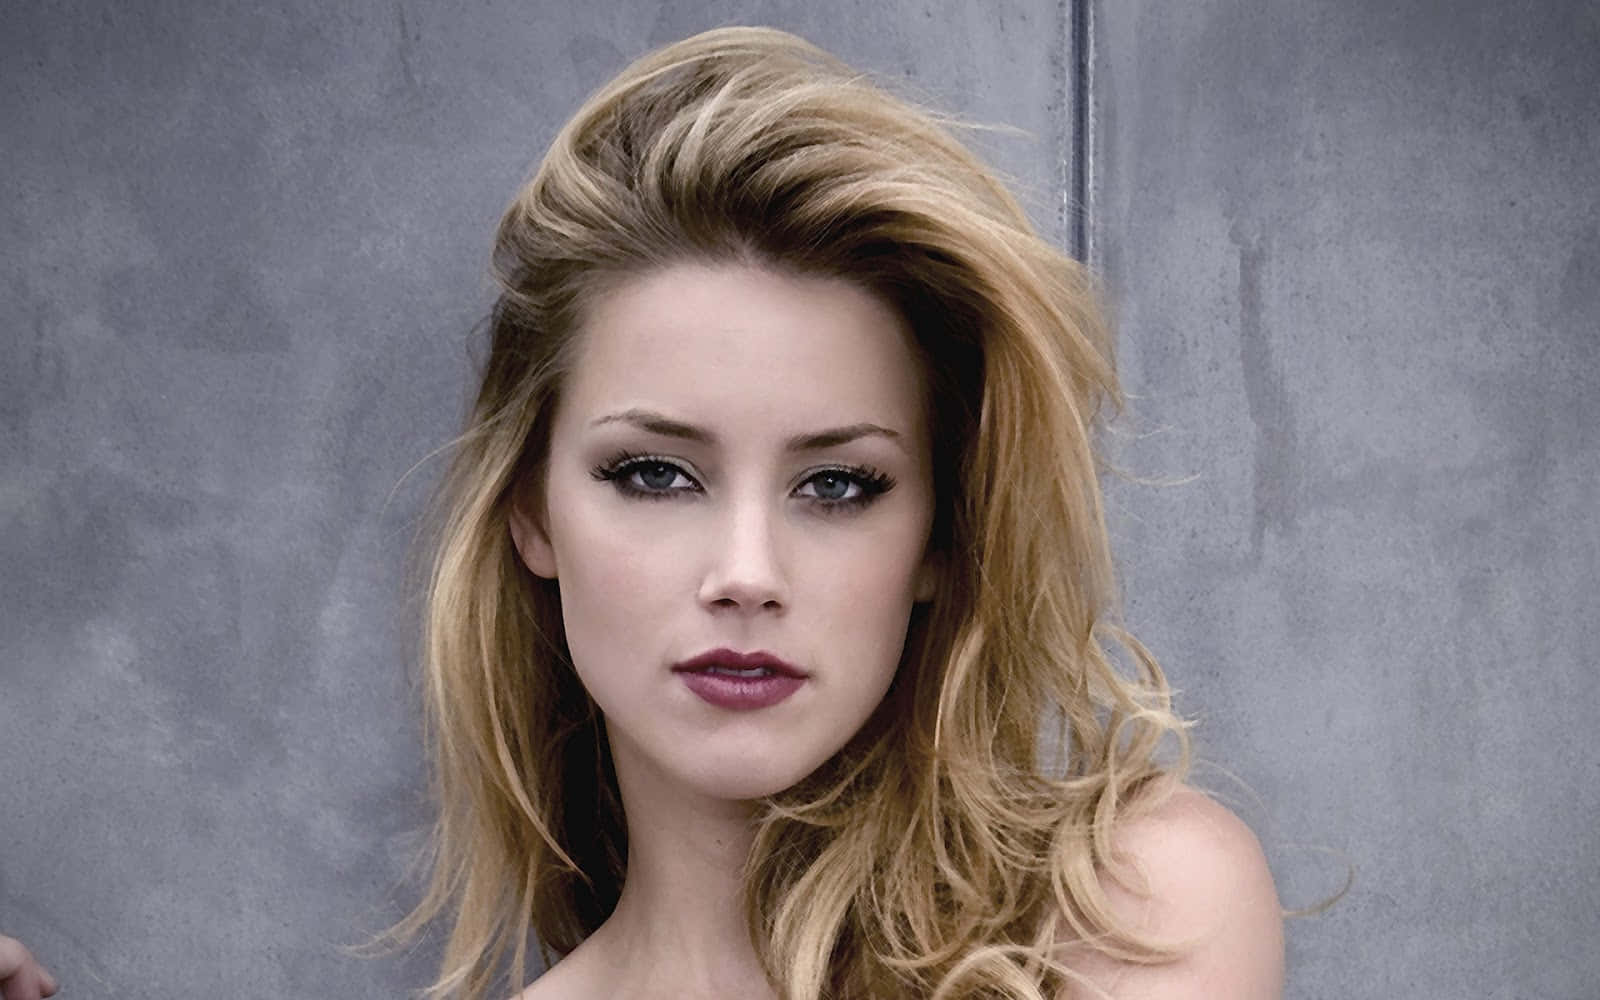 Actress Amber Heard Stuns on the Red Carpet